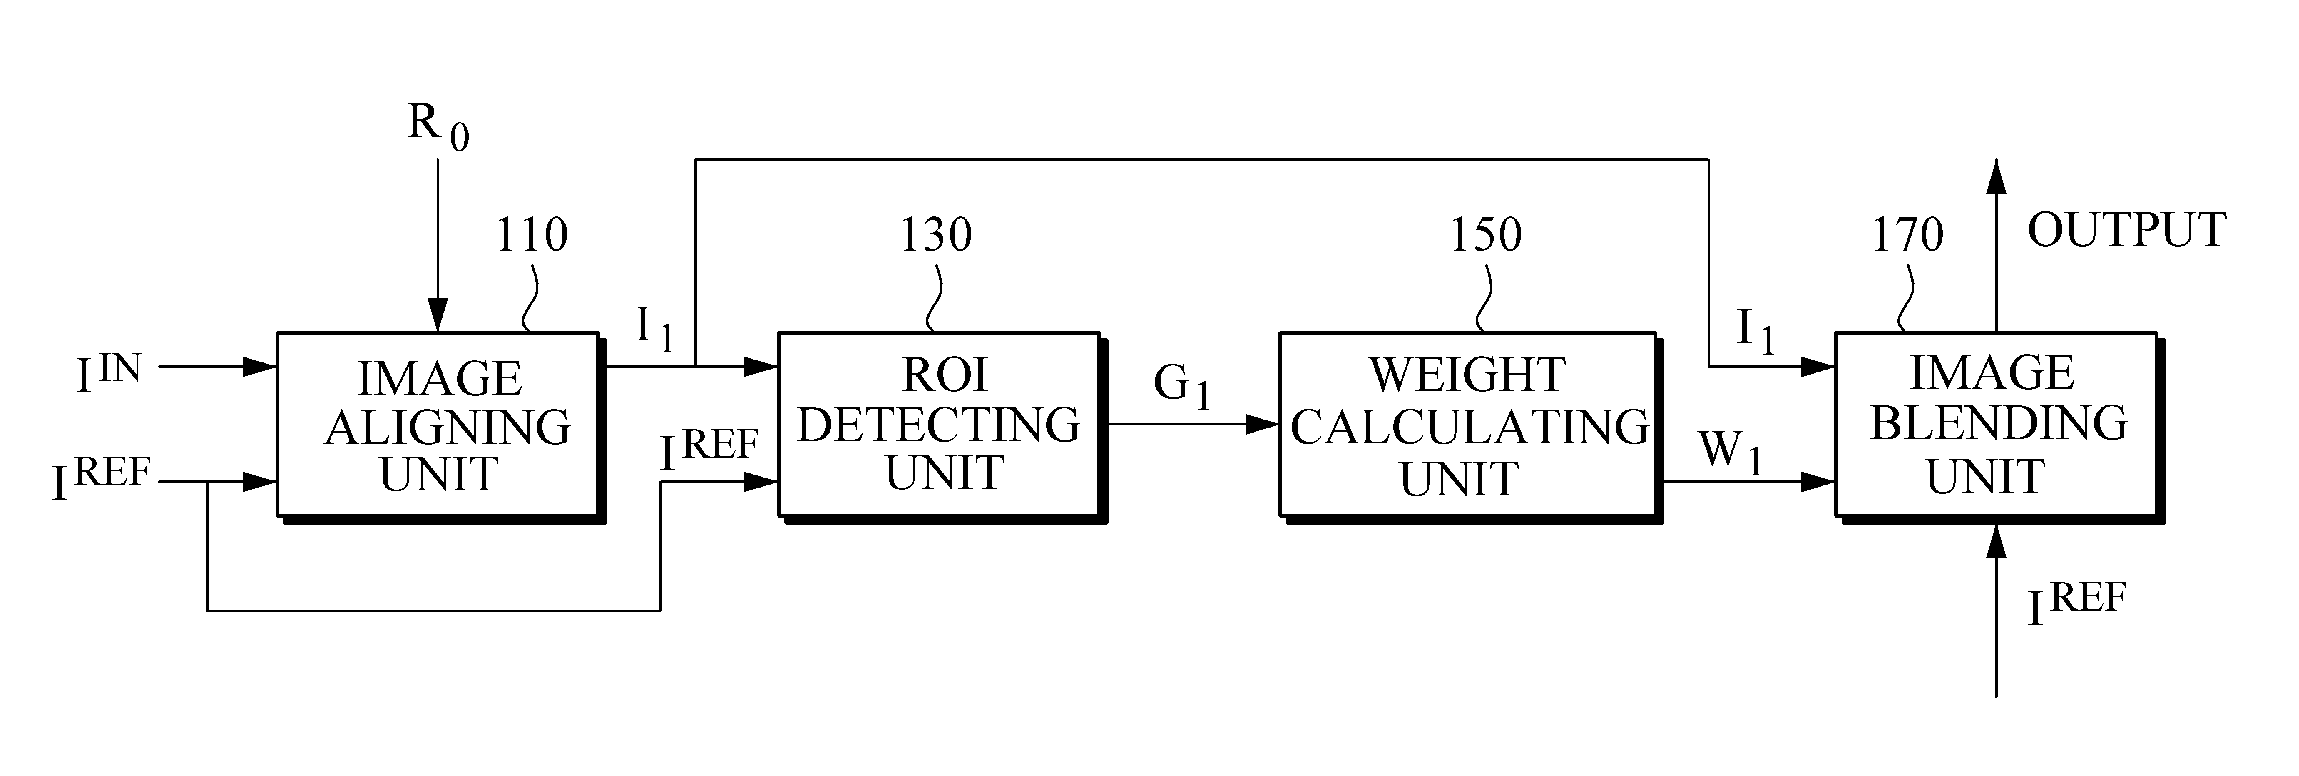 Method and apparatus for blending images